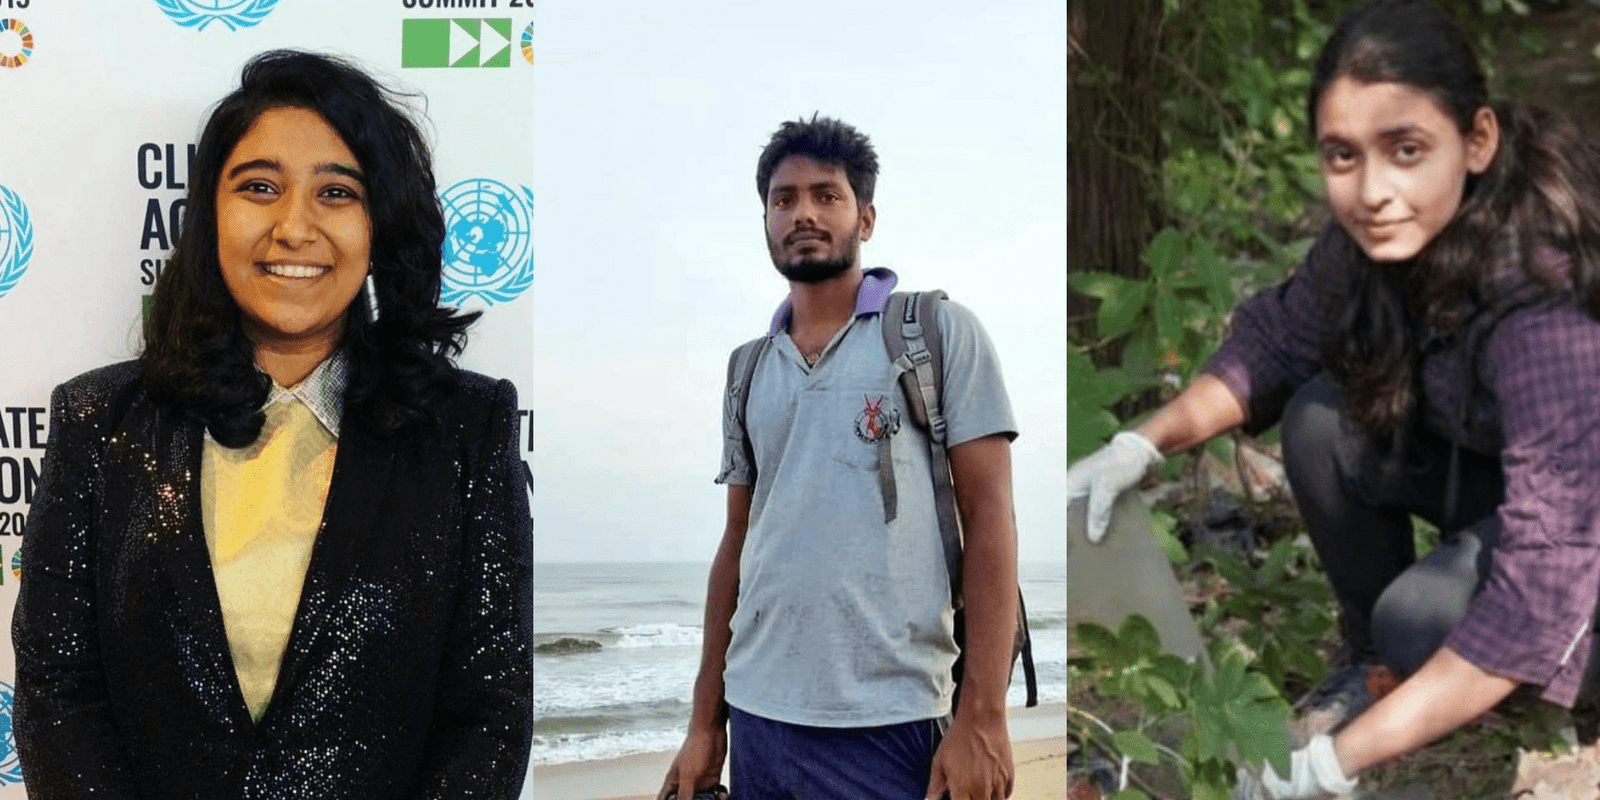 Top 5 young environmental activists of India that are making a positive impact on climate change in 2021